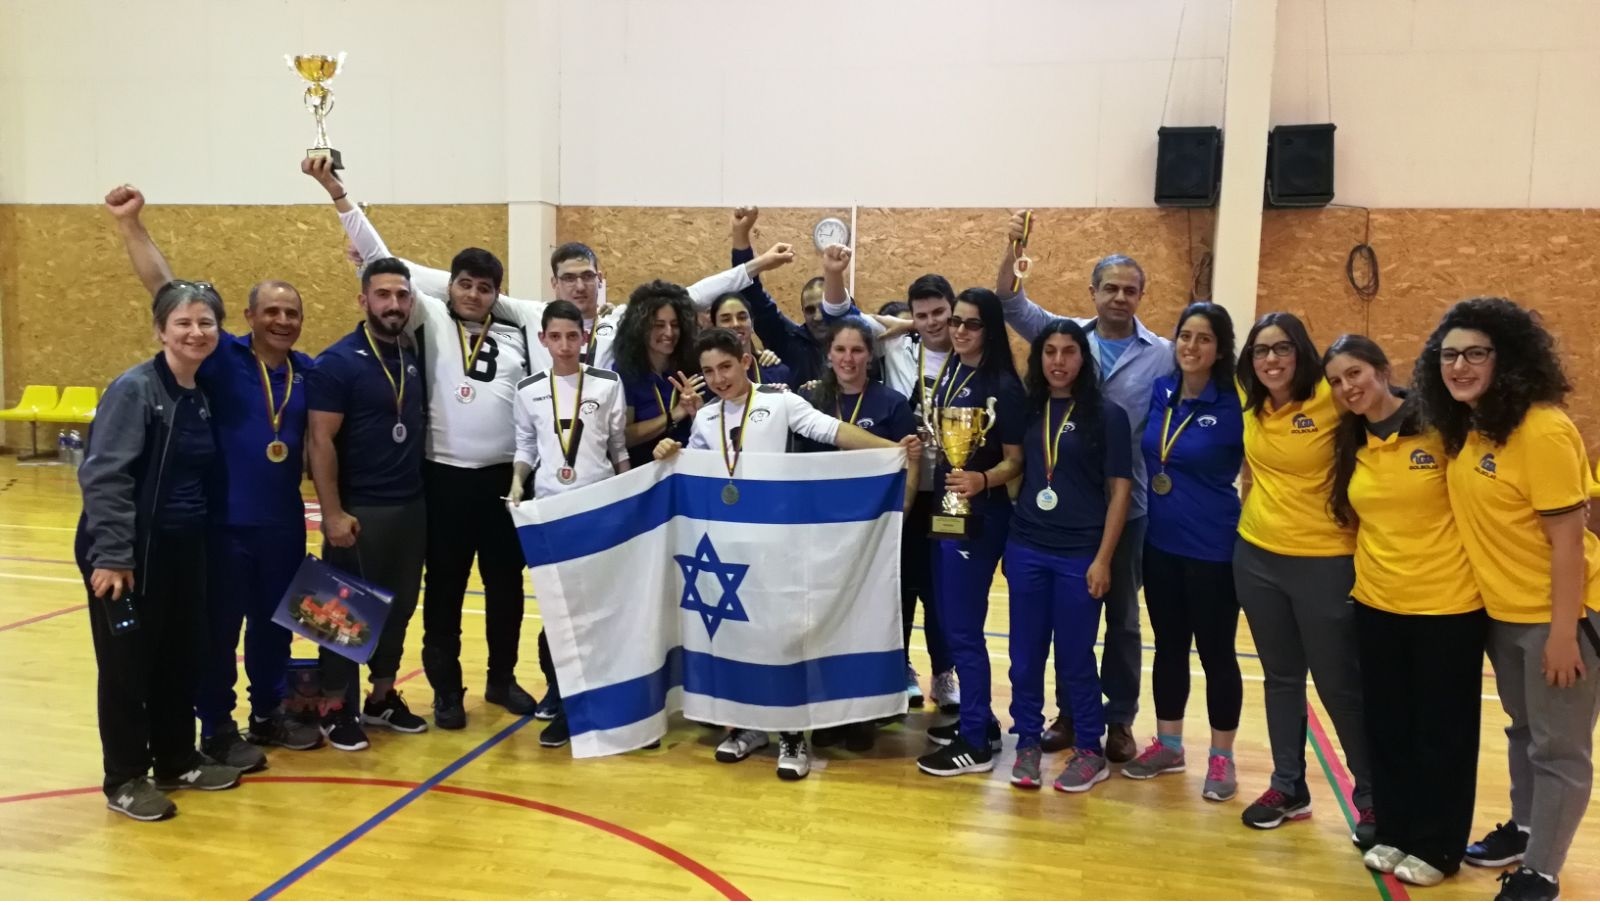 Israel won medals at the Women's and Youth Trakai International Goalball Tournament in Lithuania, March 2018. Photo courtesy of Israel Paralympic Committee